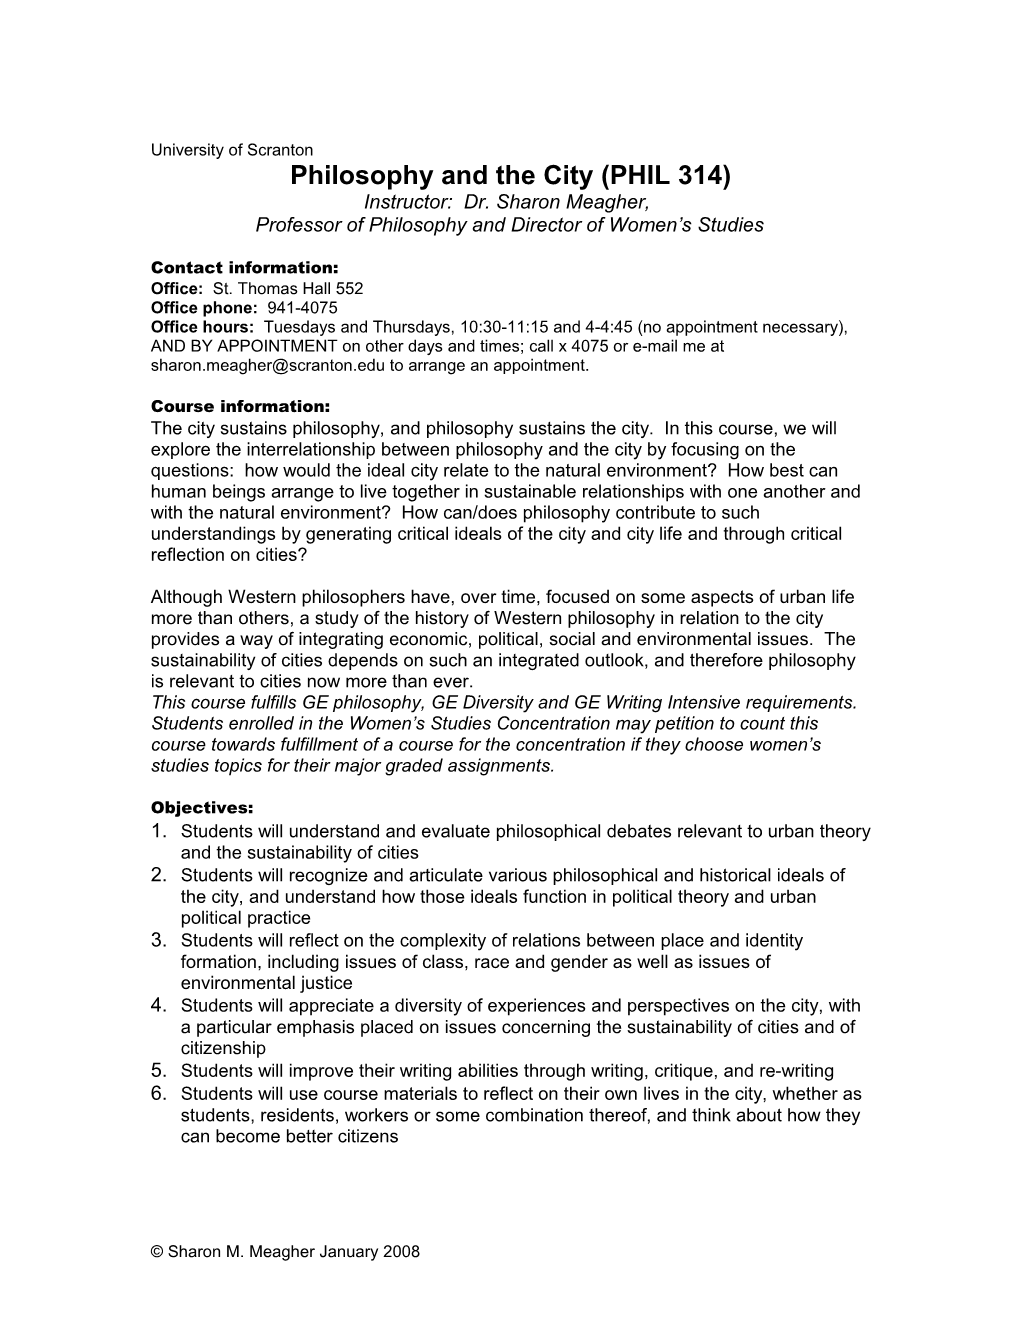 Philosophy and the City (PHIL 314)